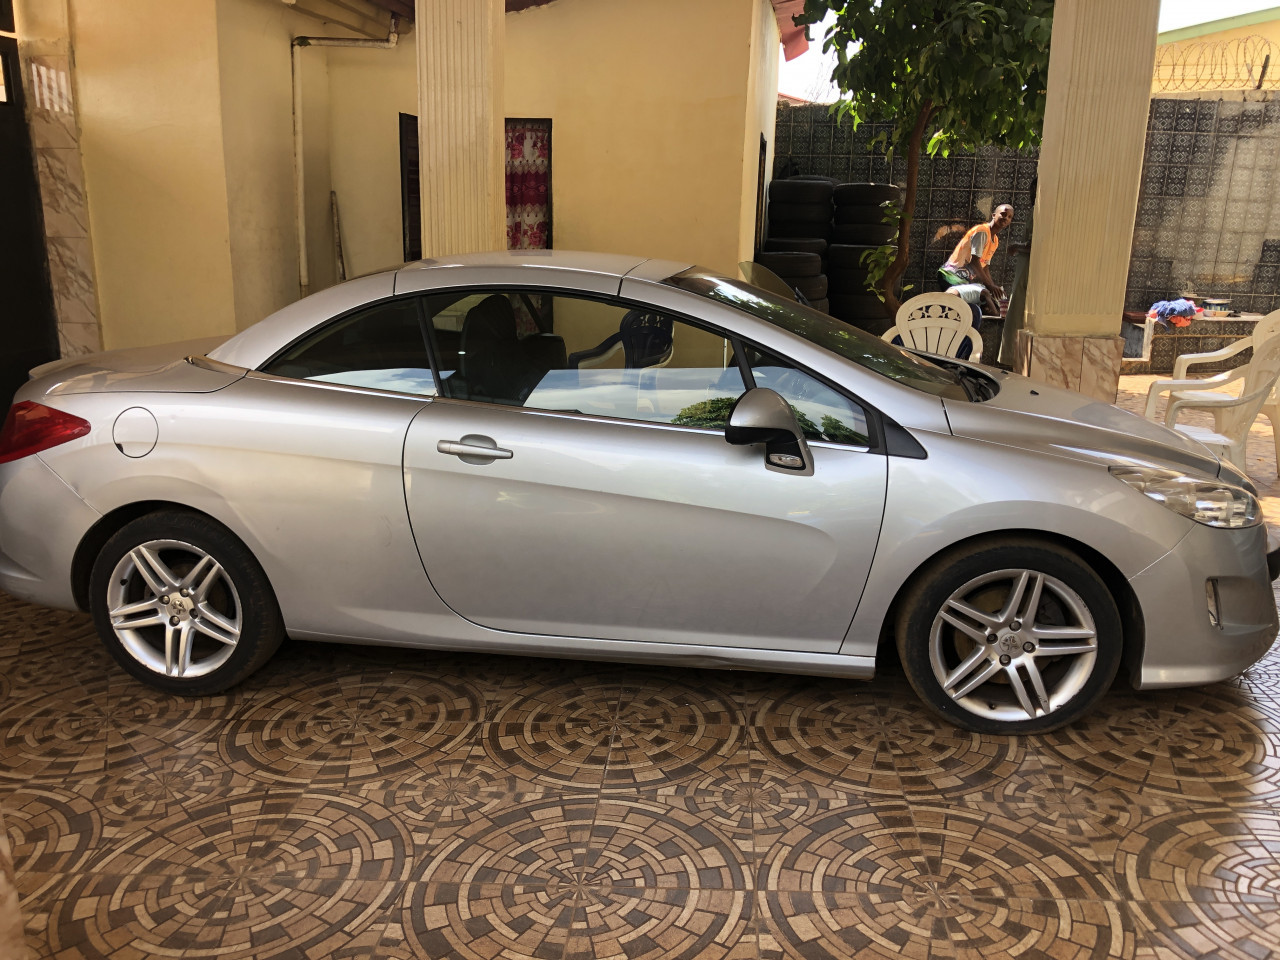 Peugeot 308, Voitures, Conakry